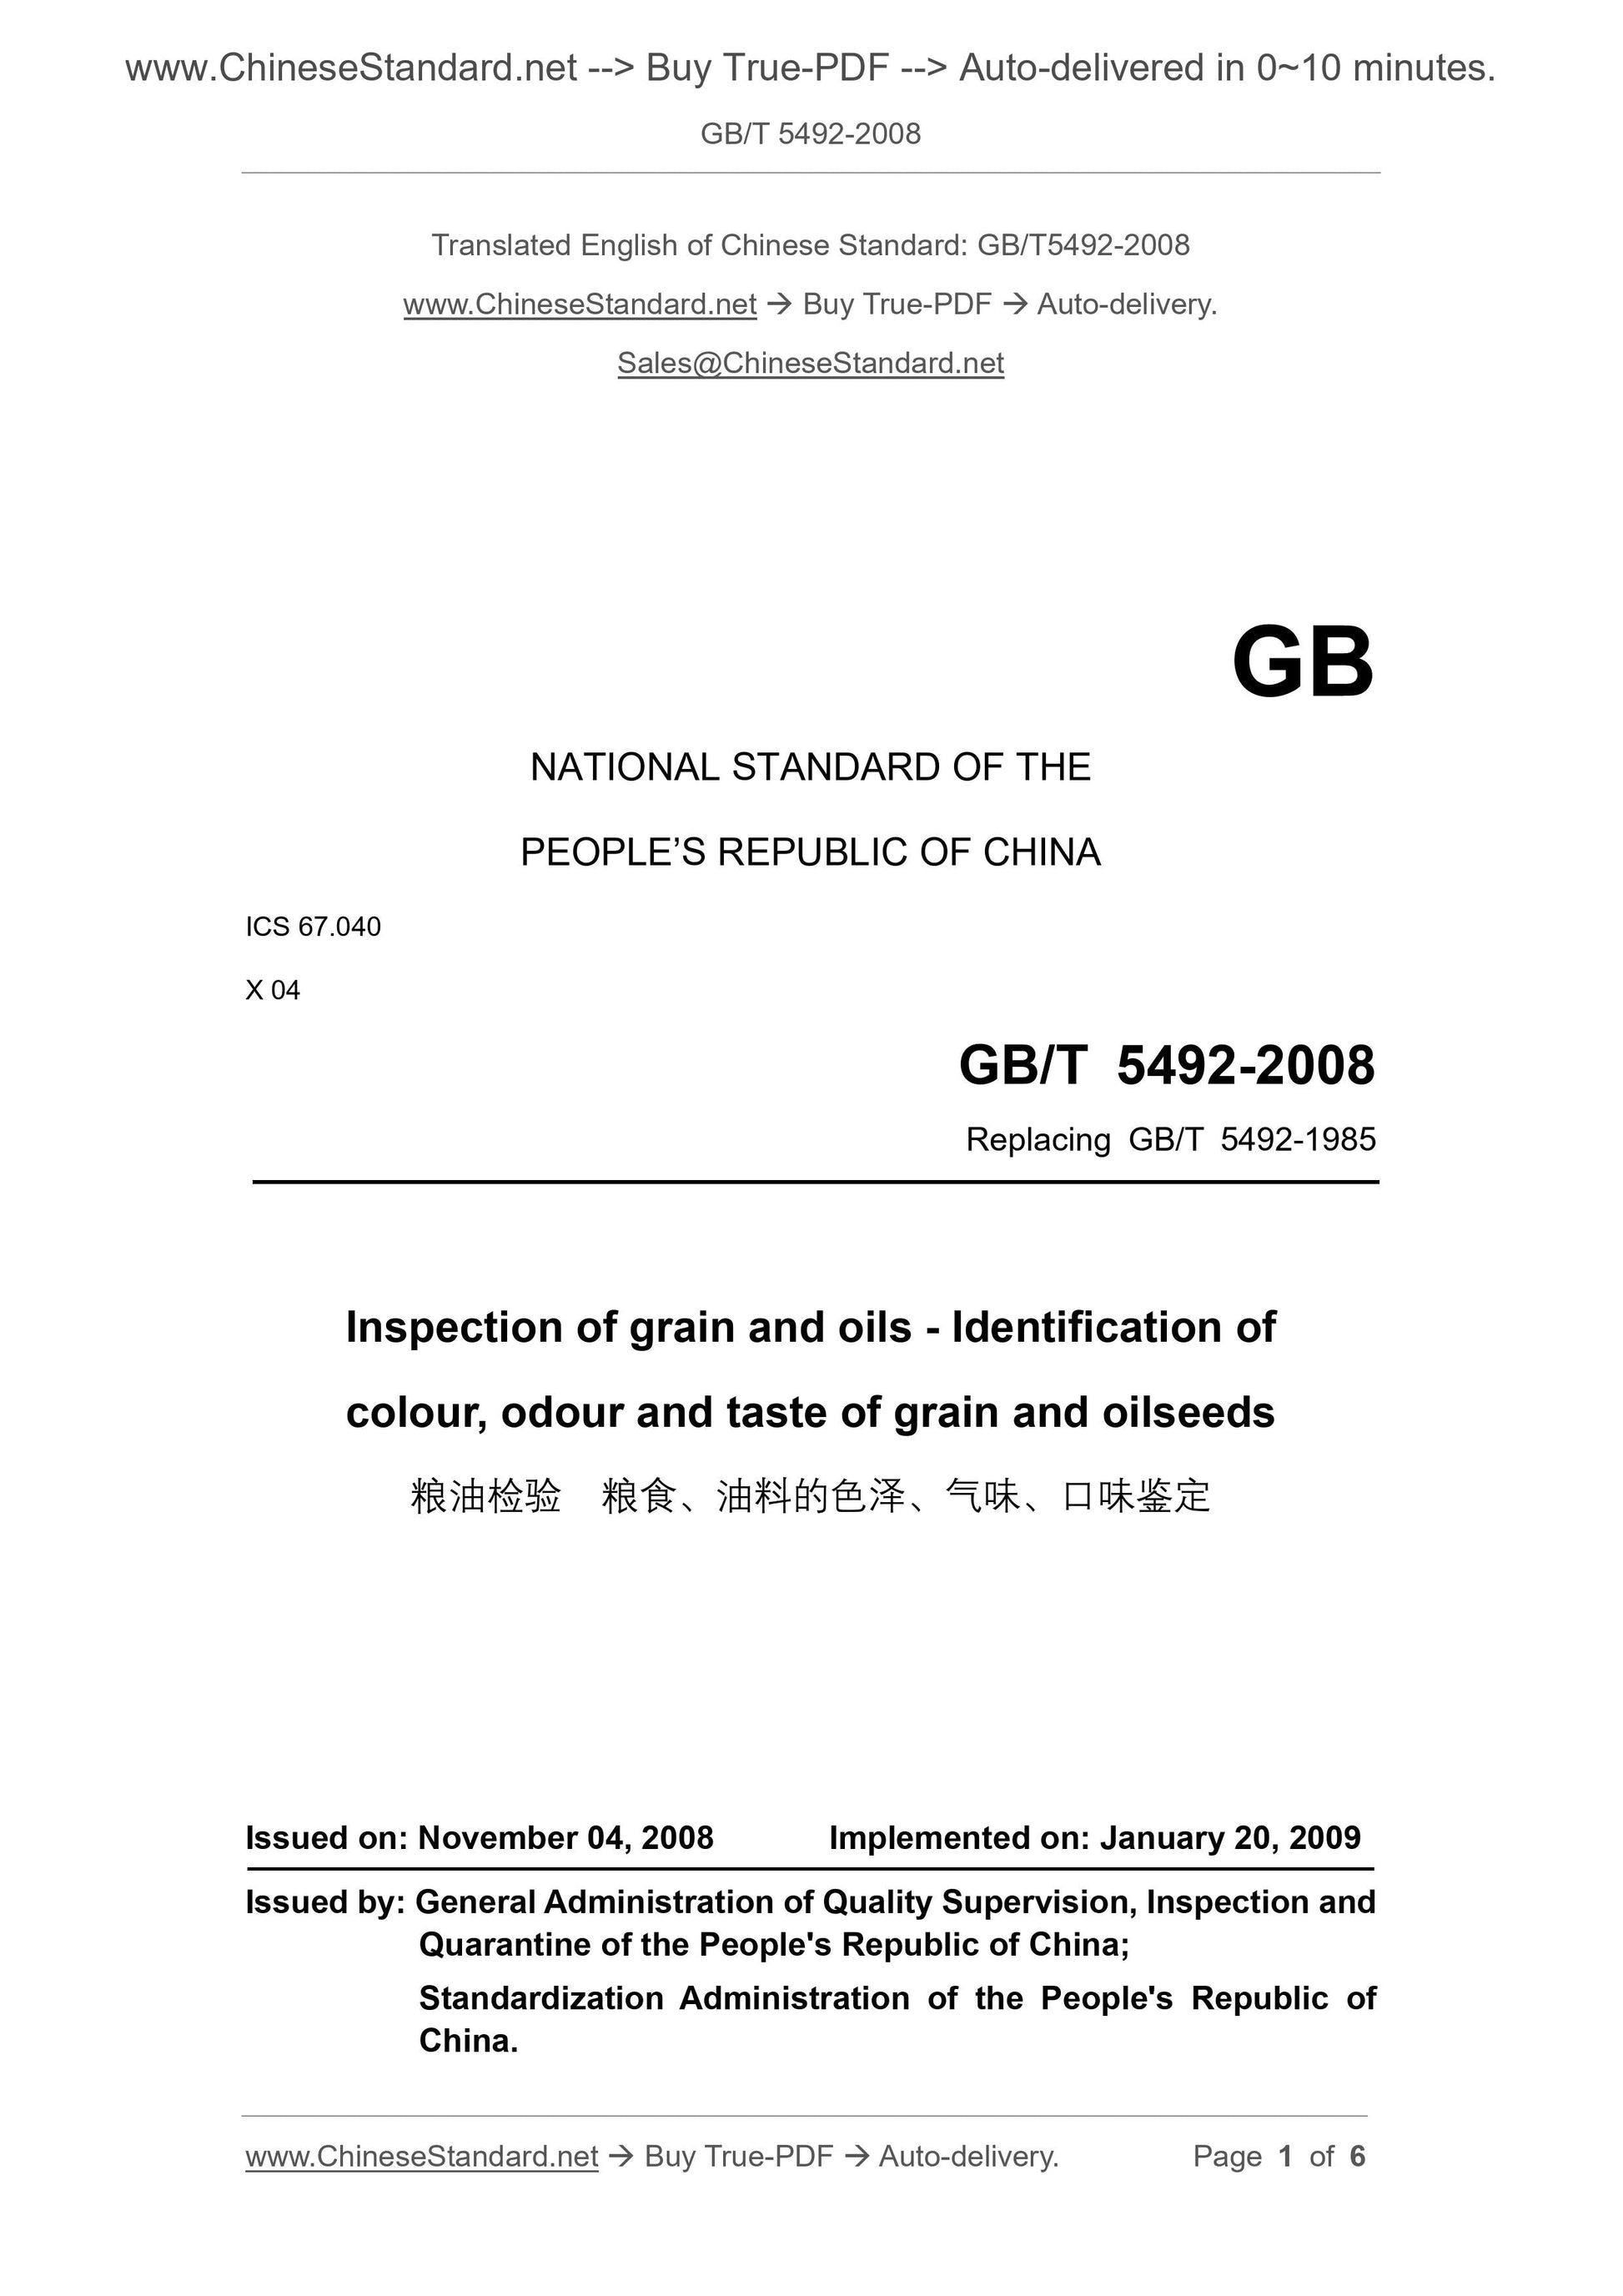 GB/T 5492-2008 Page 1